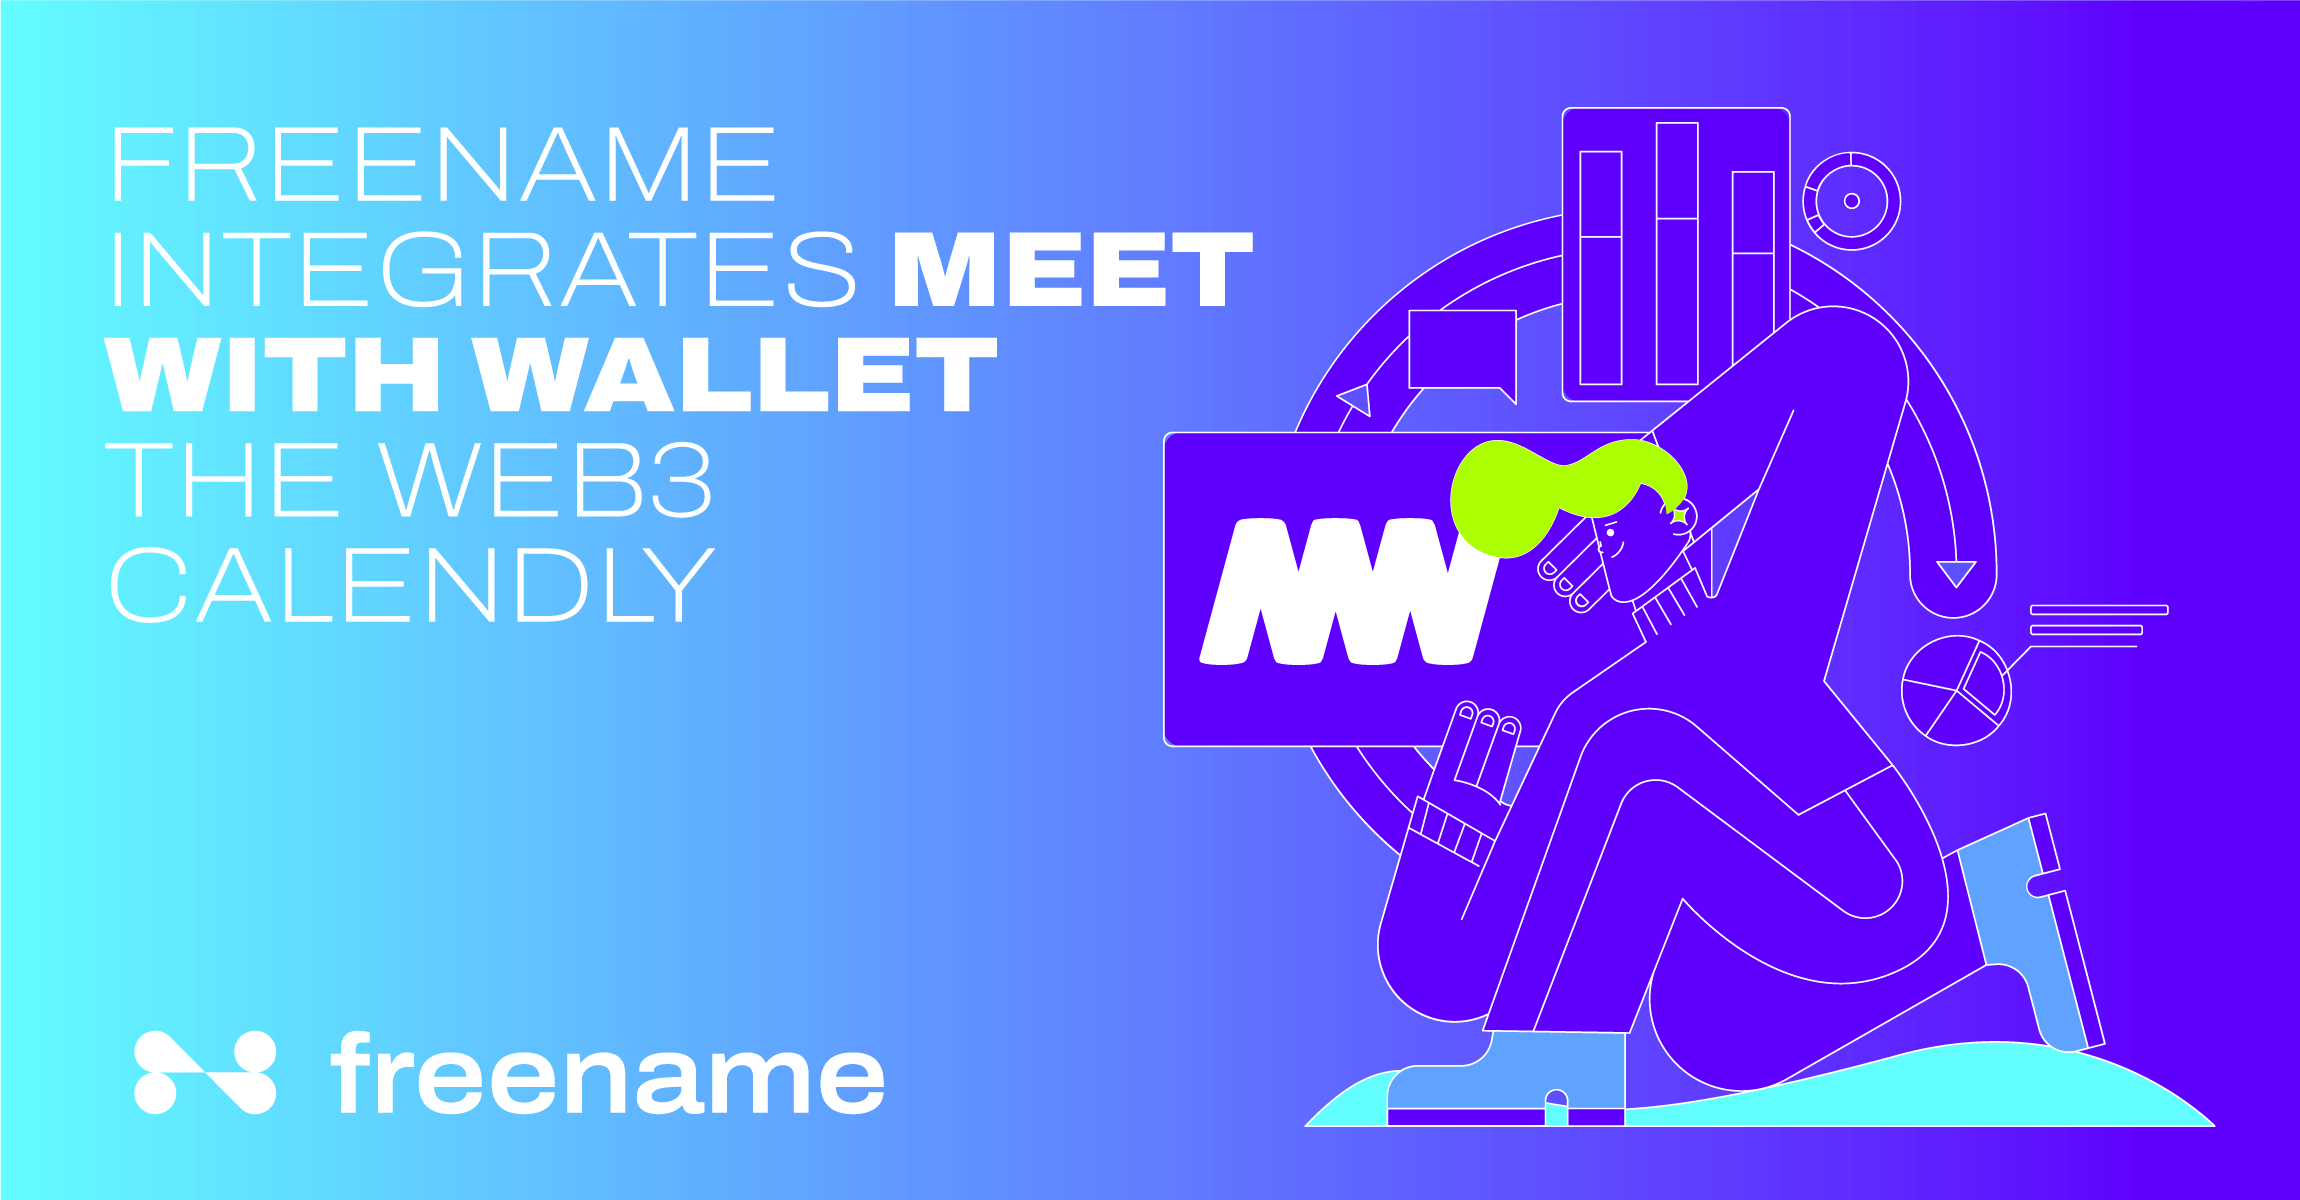 Freename Integrates Meet with Wallet - the Web3 Calendly